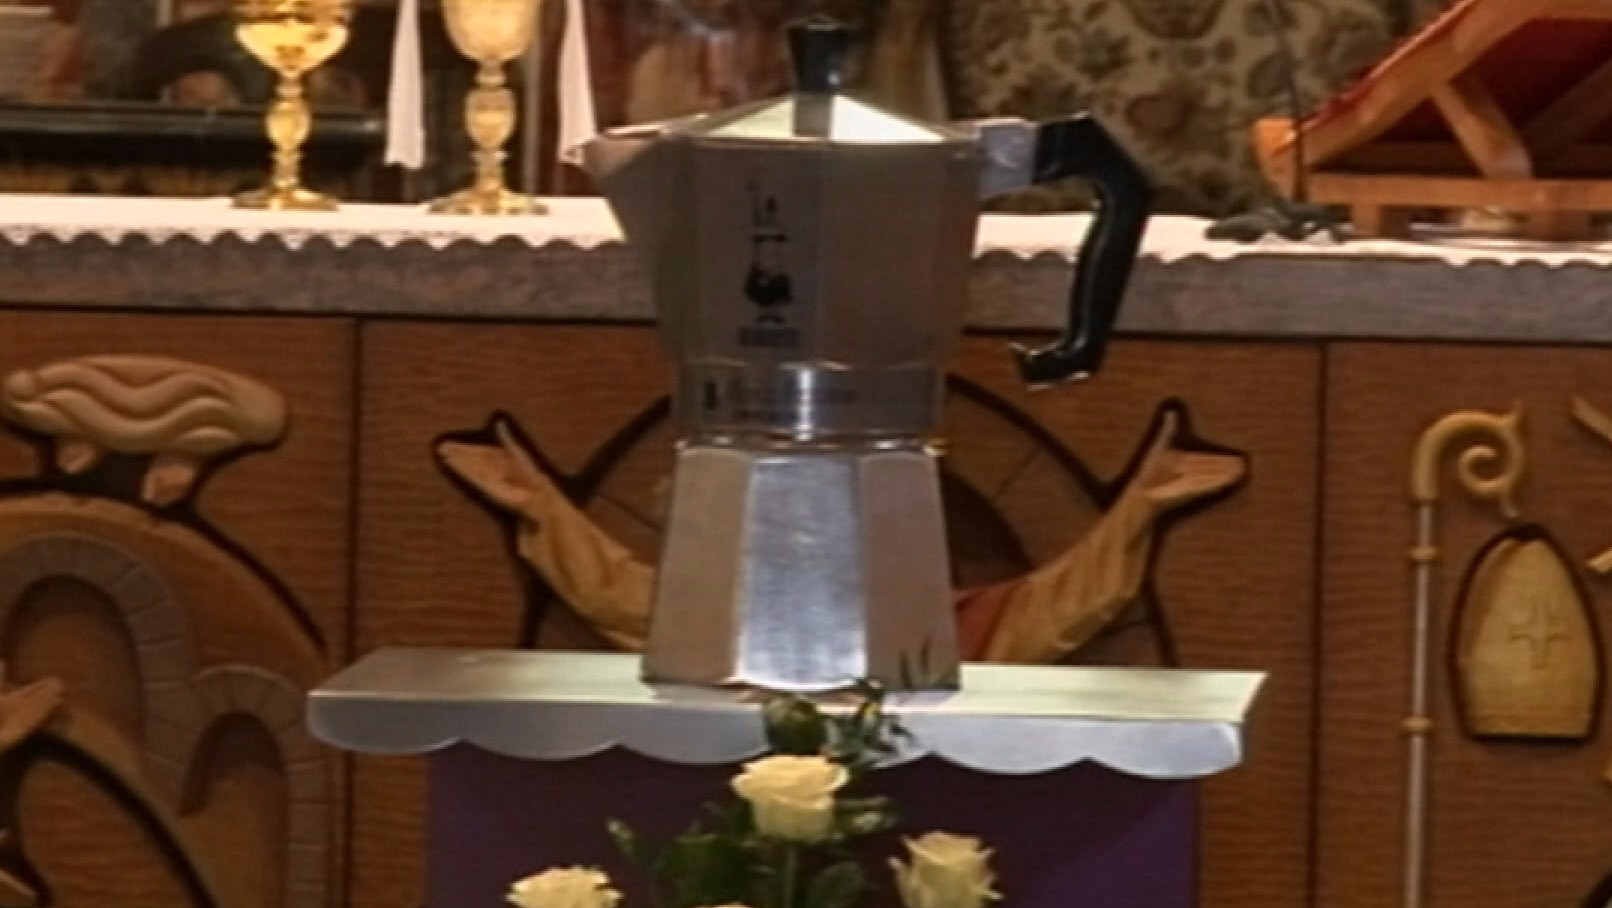 Italian Coffee Pot Mogul Cremated and Buried in the Brewer He